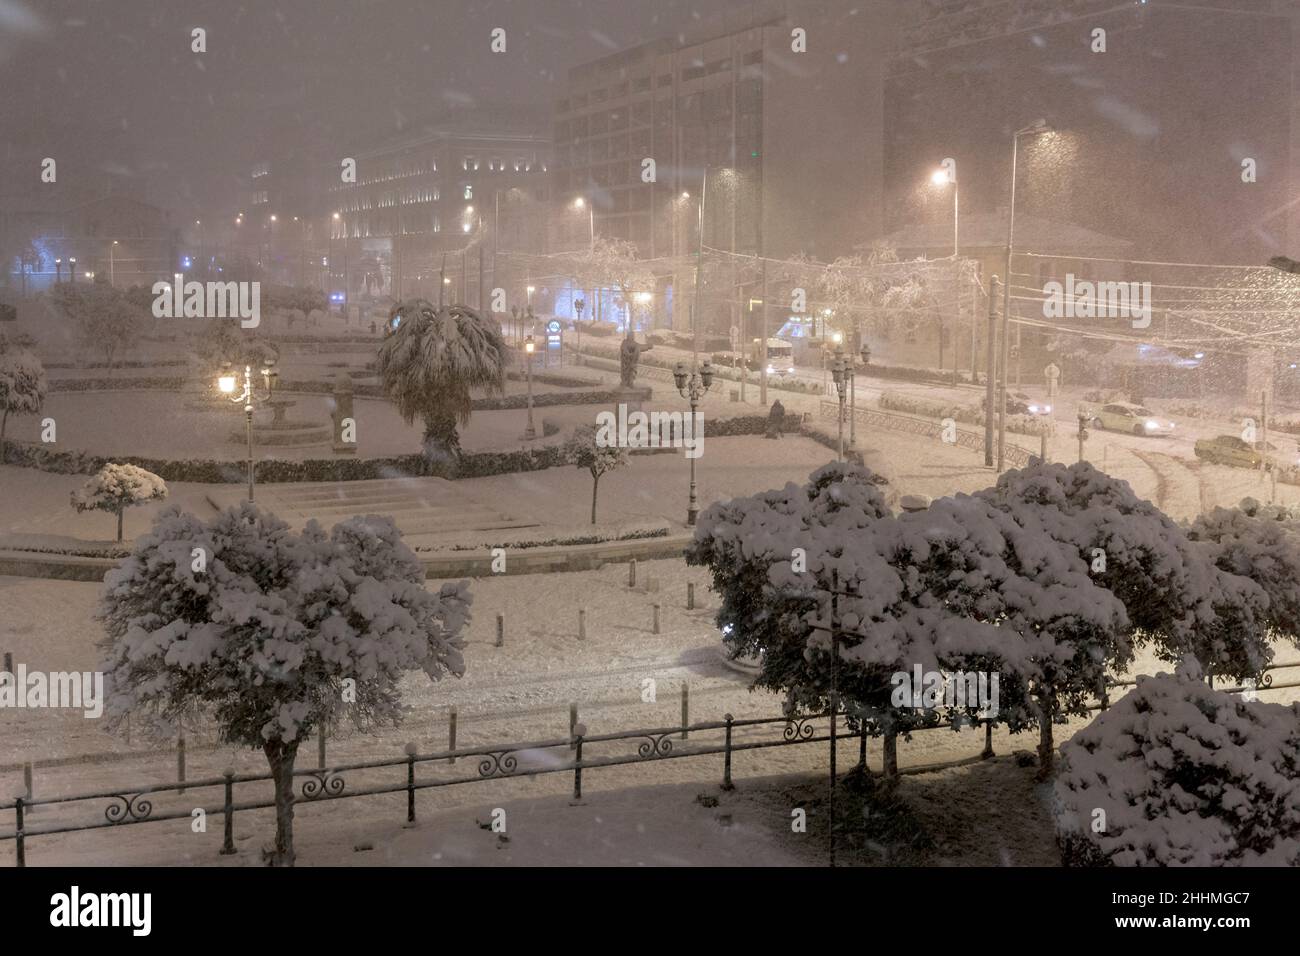 Athens, Greece, the avenue of Panepistimiou is covered in snow during heavy snowfall in January 24th 2022, creating a dreamy cityscape Stock Photo